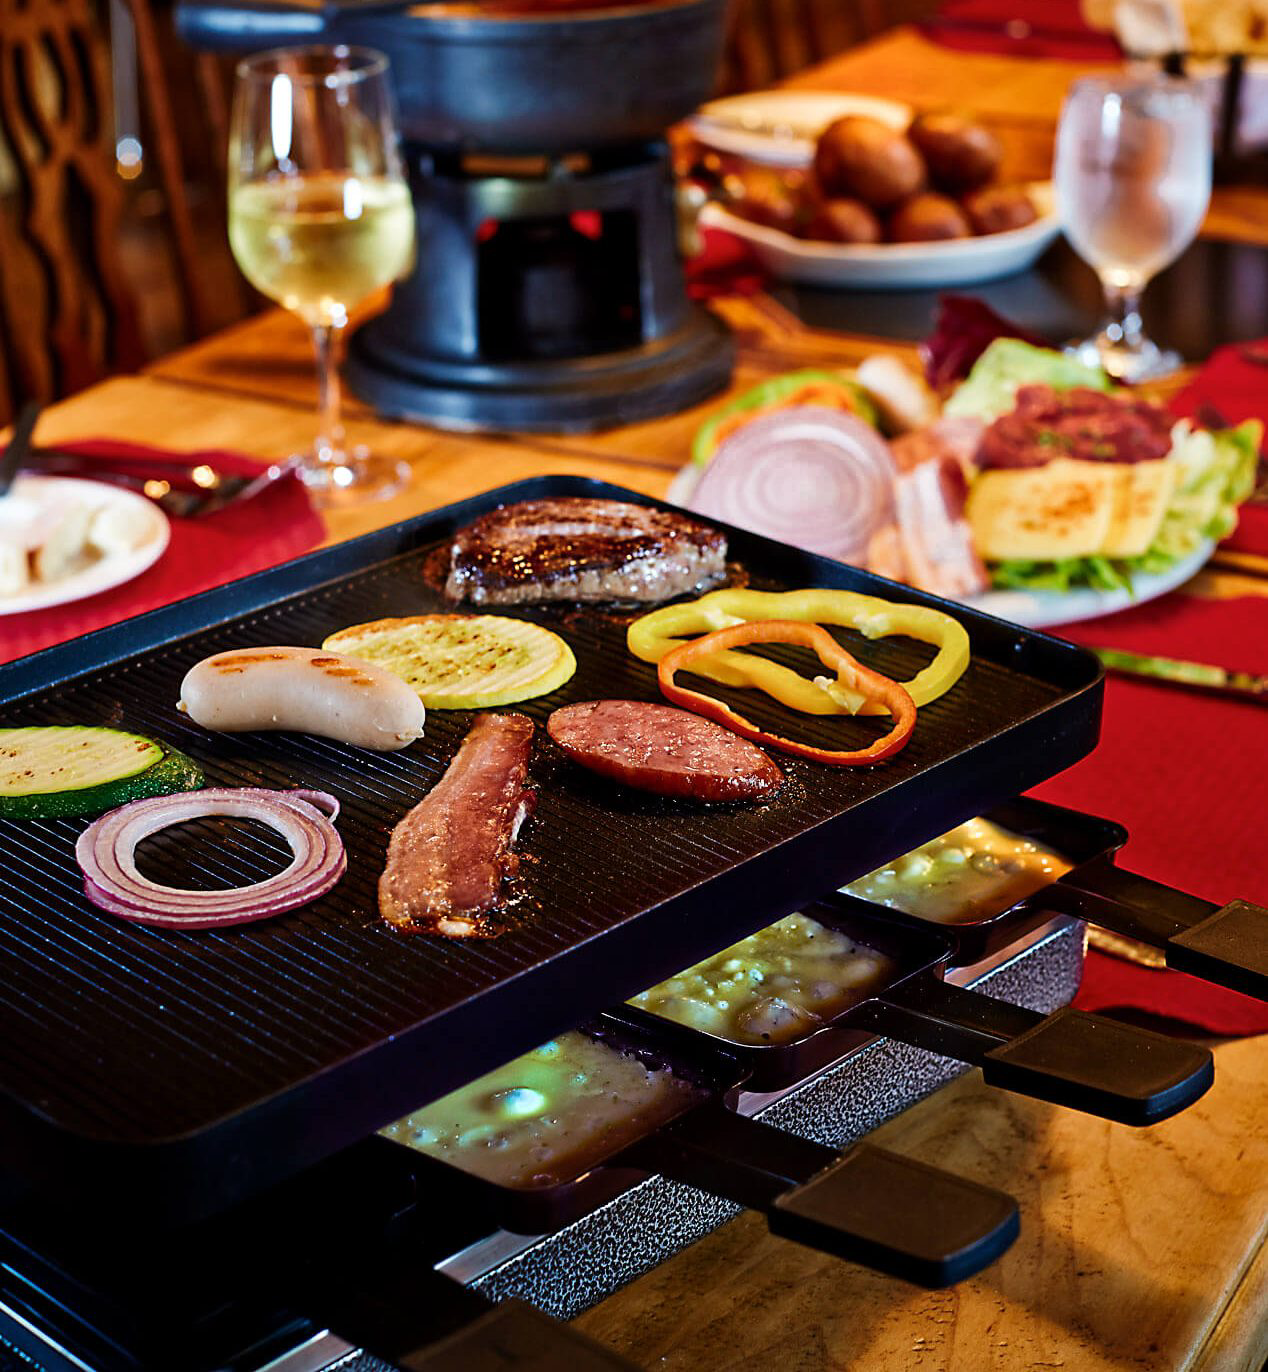 A raclette grill with a griddle on top cooking various meats and vegetables.